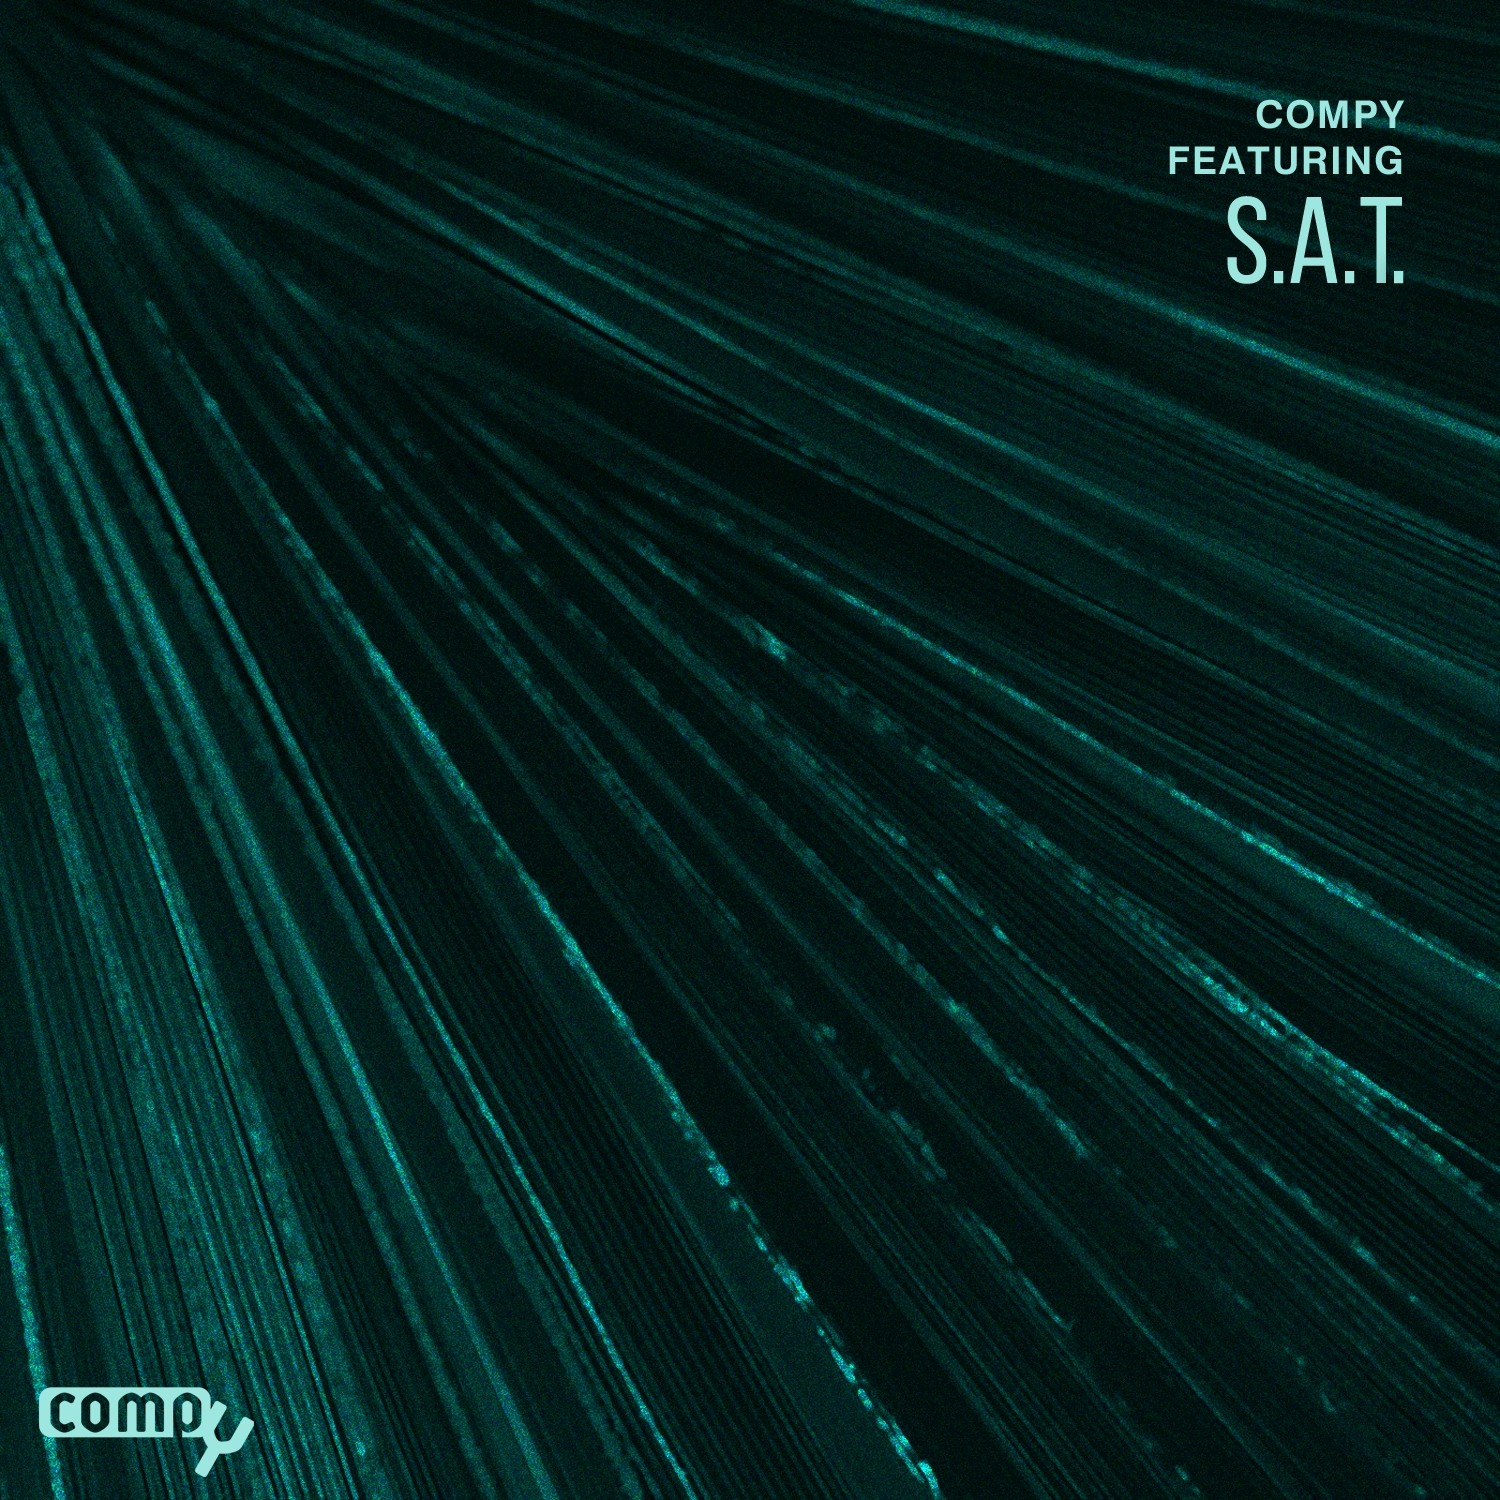 Compy Featuring: S.A.T